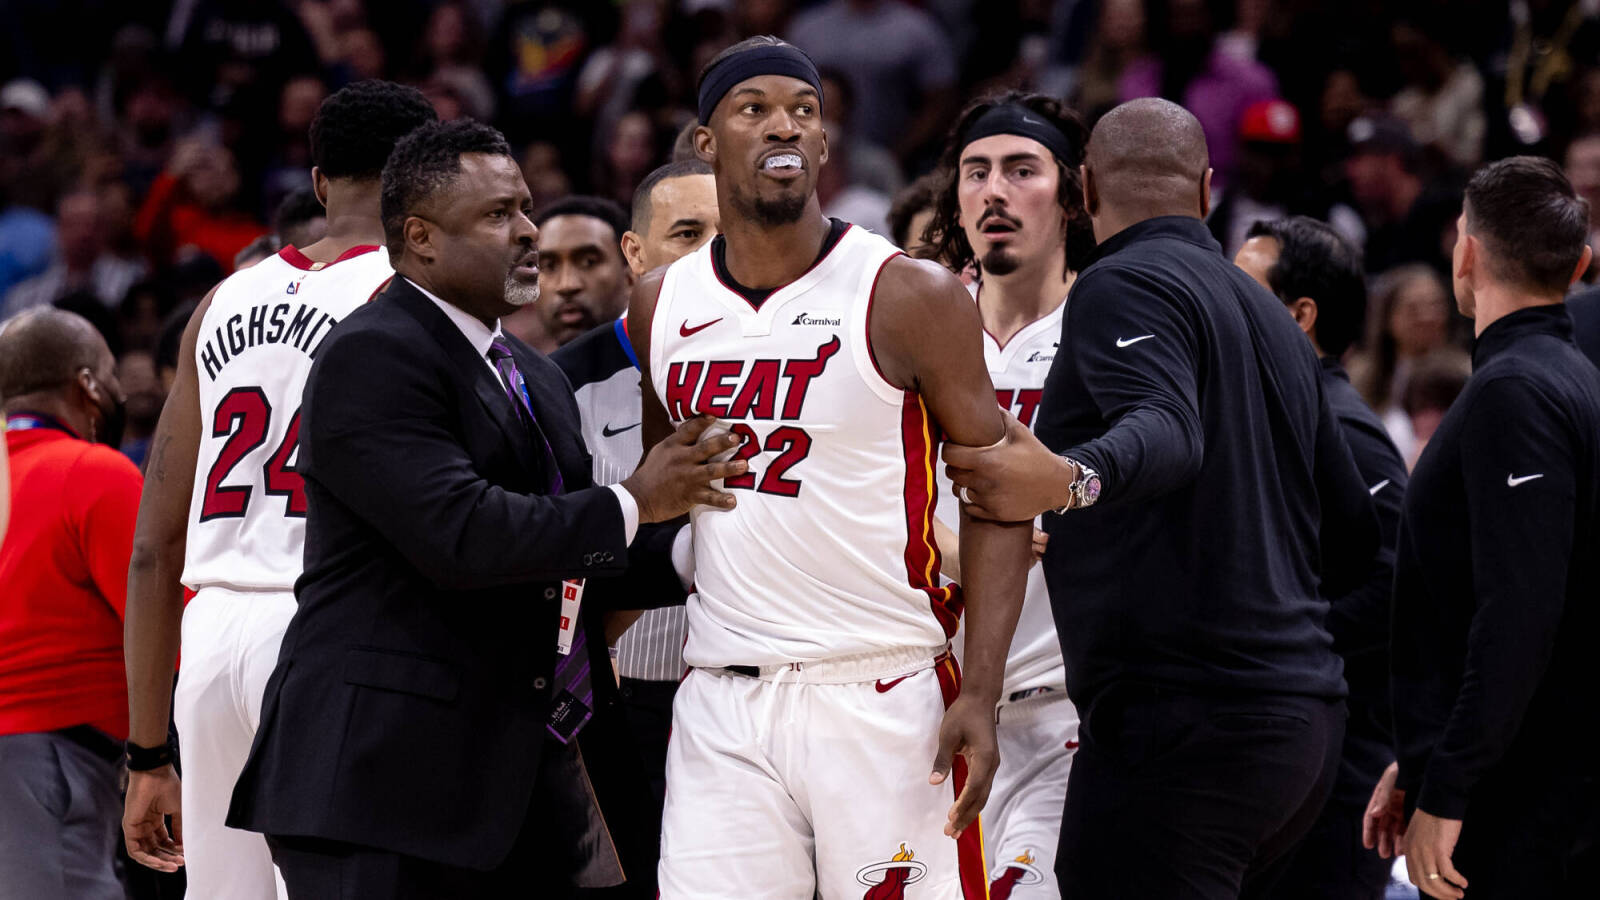 Heat star Jimmy Butler issues warning to the Pelicans following brawl